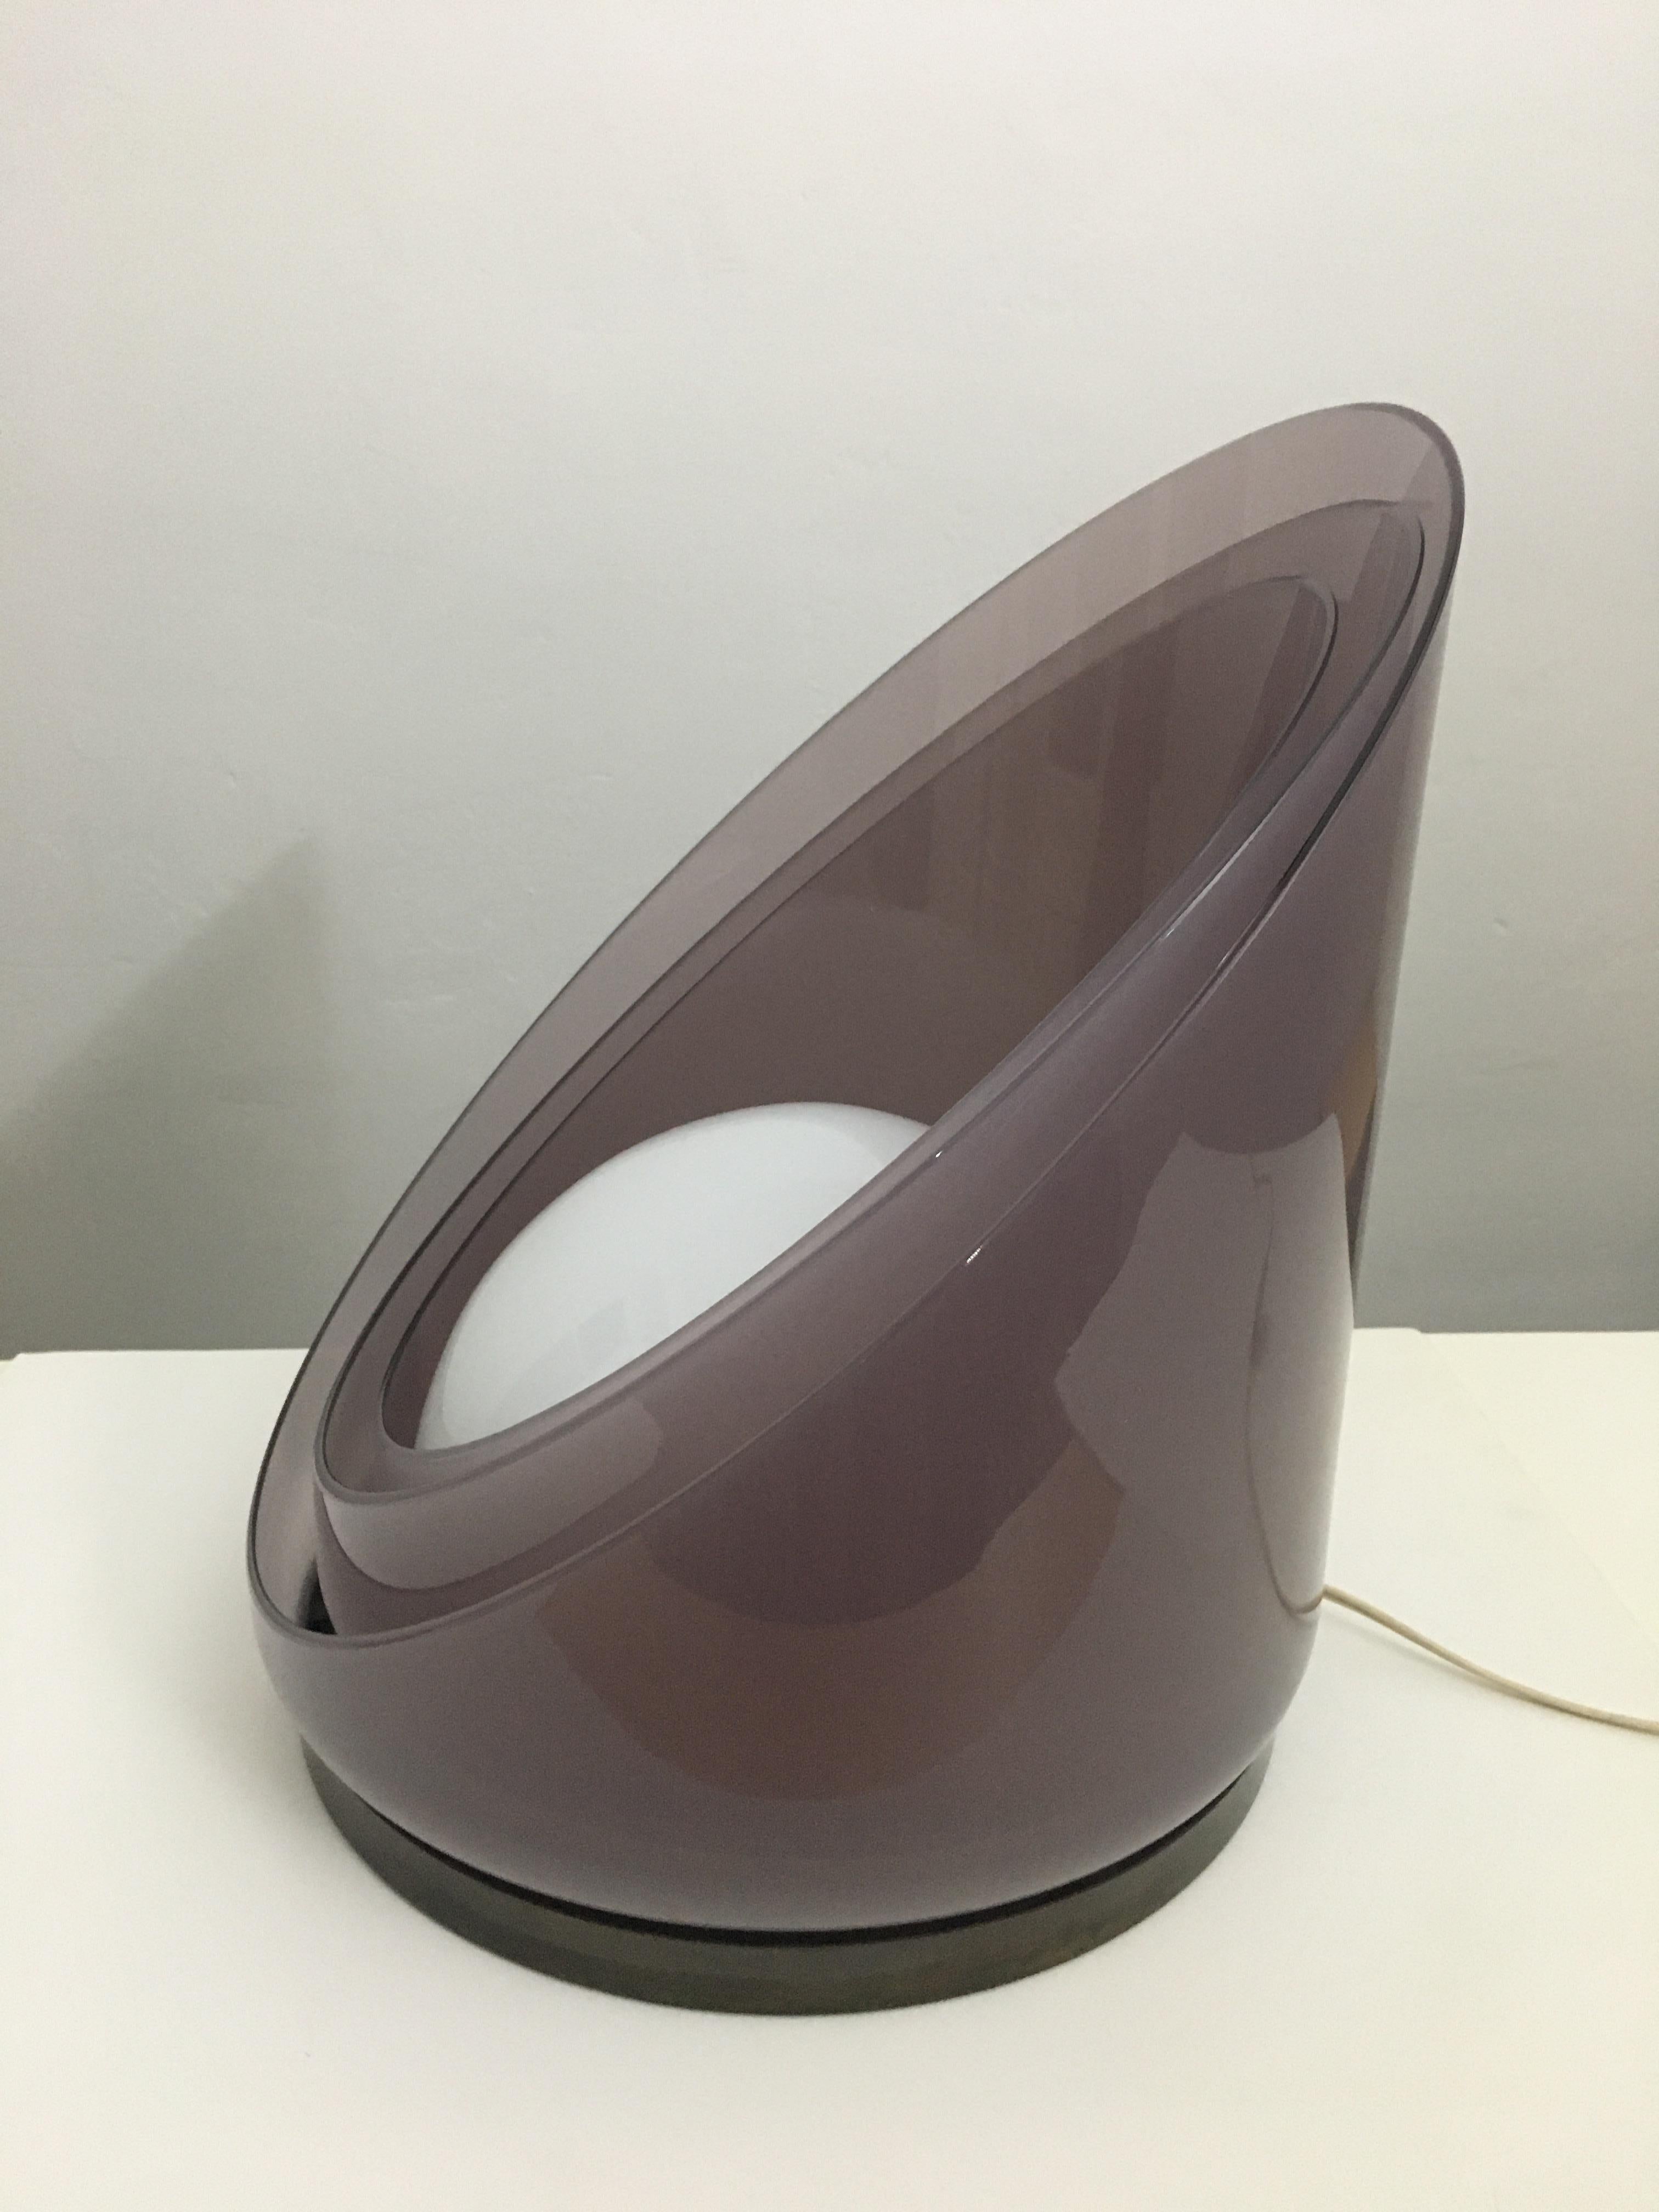 Glass Table Lamp Model LT 300 by Carlo Nason, 1974 For Sale 7